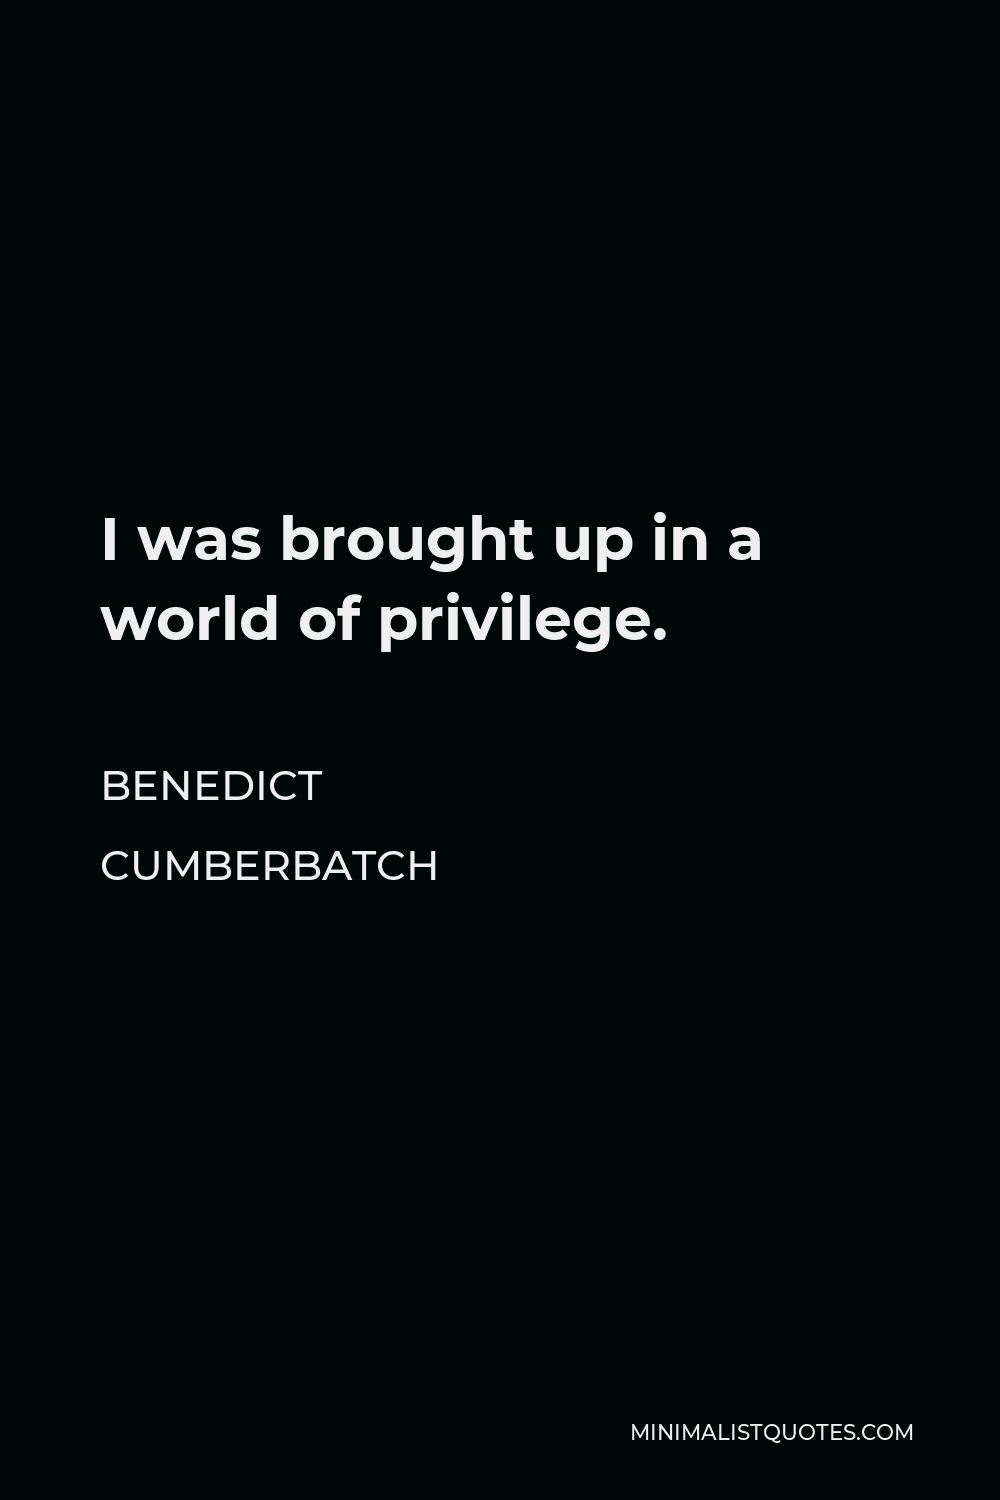 Benedict Cumberbatch Quote - I was brought up in a world of privilege.